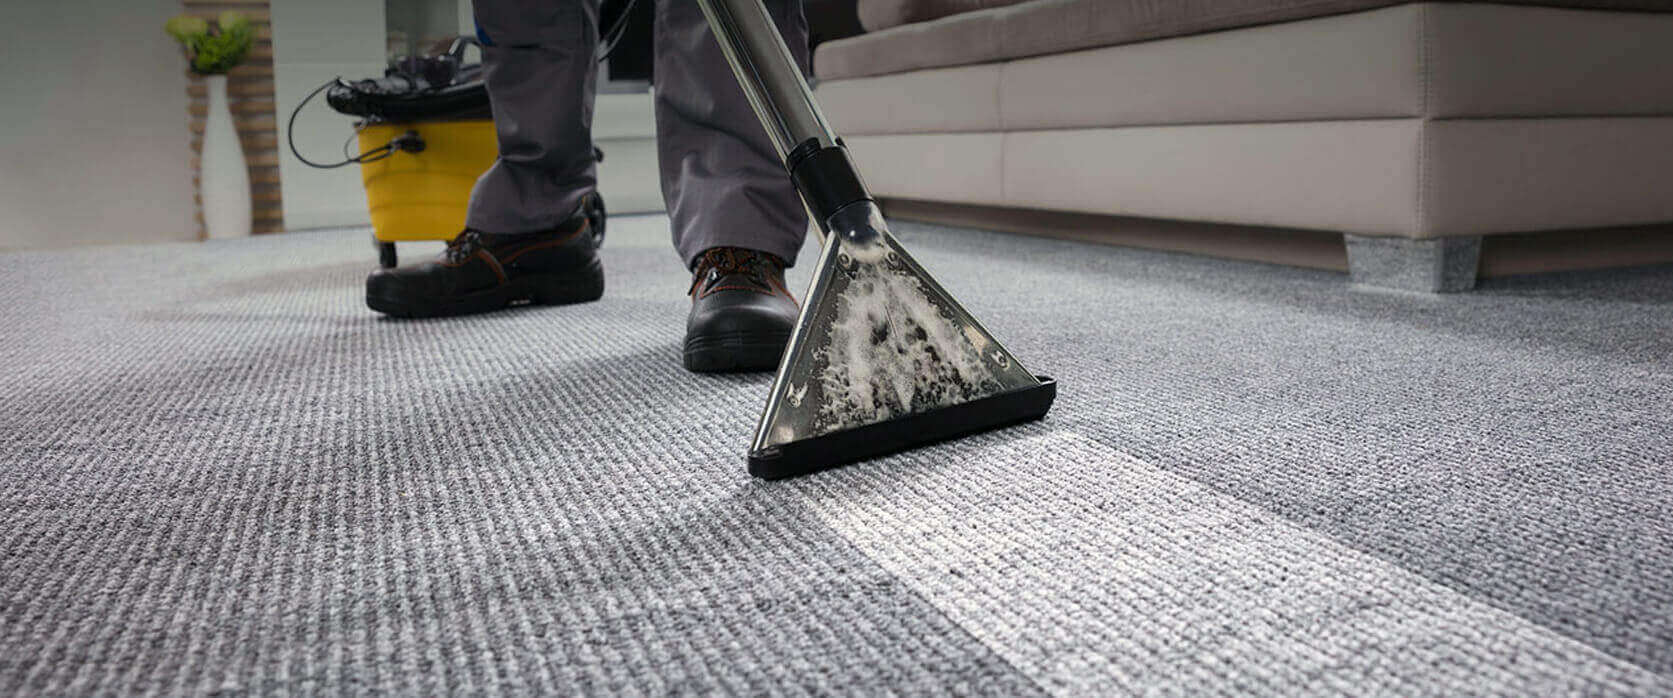 carpet cleaning services for vacate cleaning in Adelaide